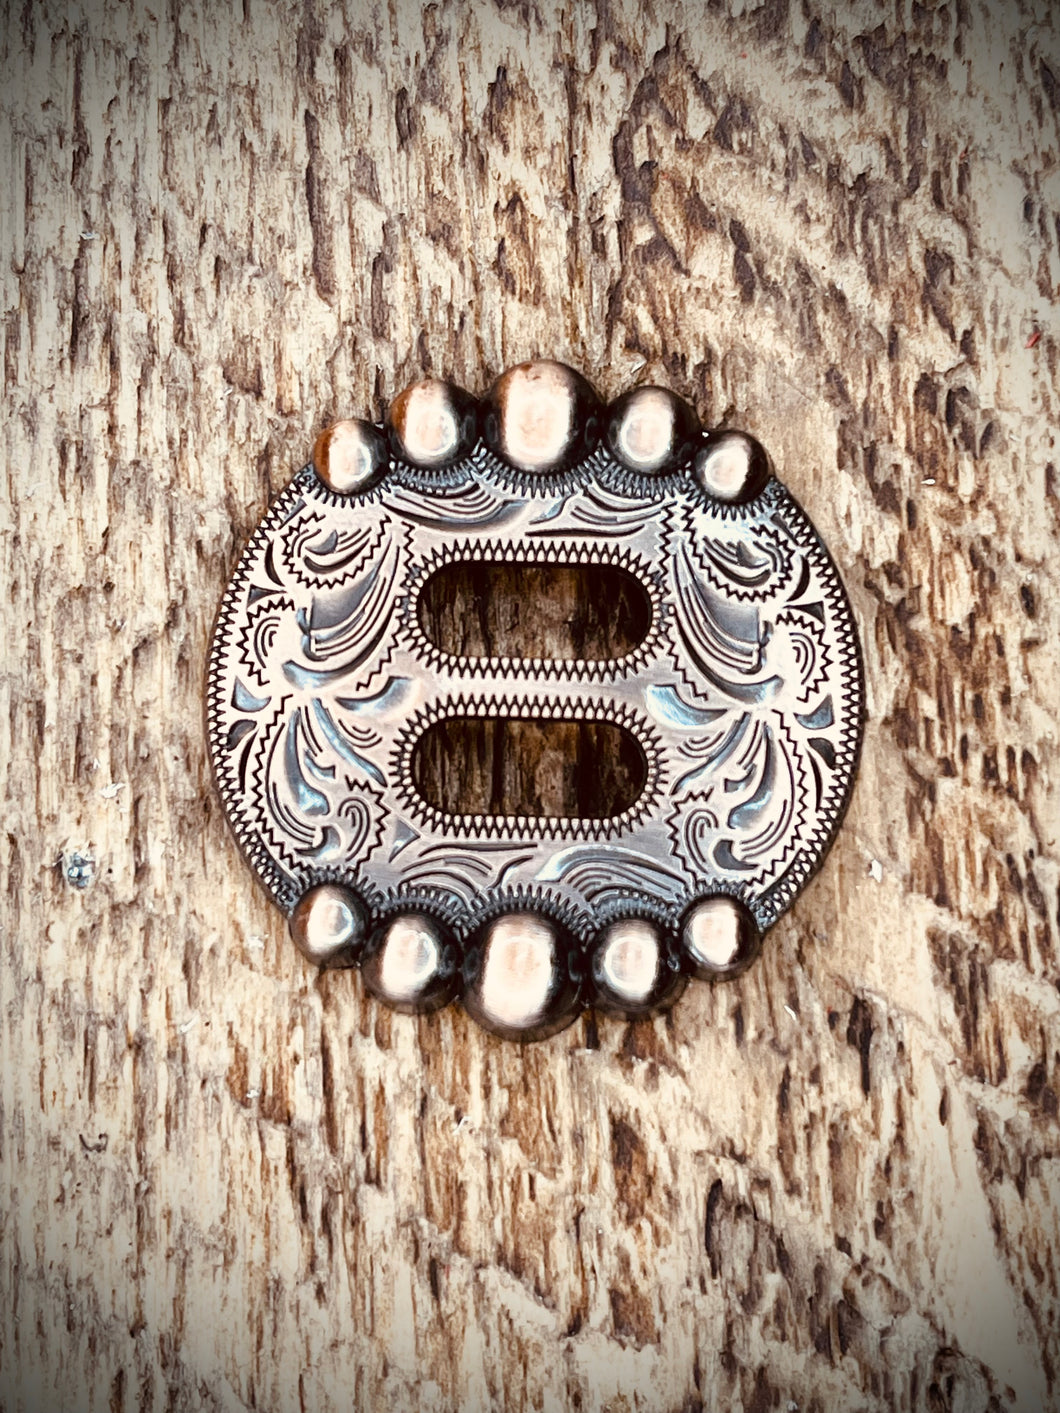 Antique Bead Slotted Conchos